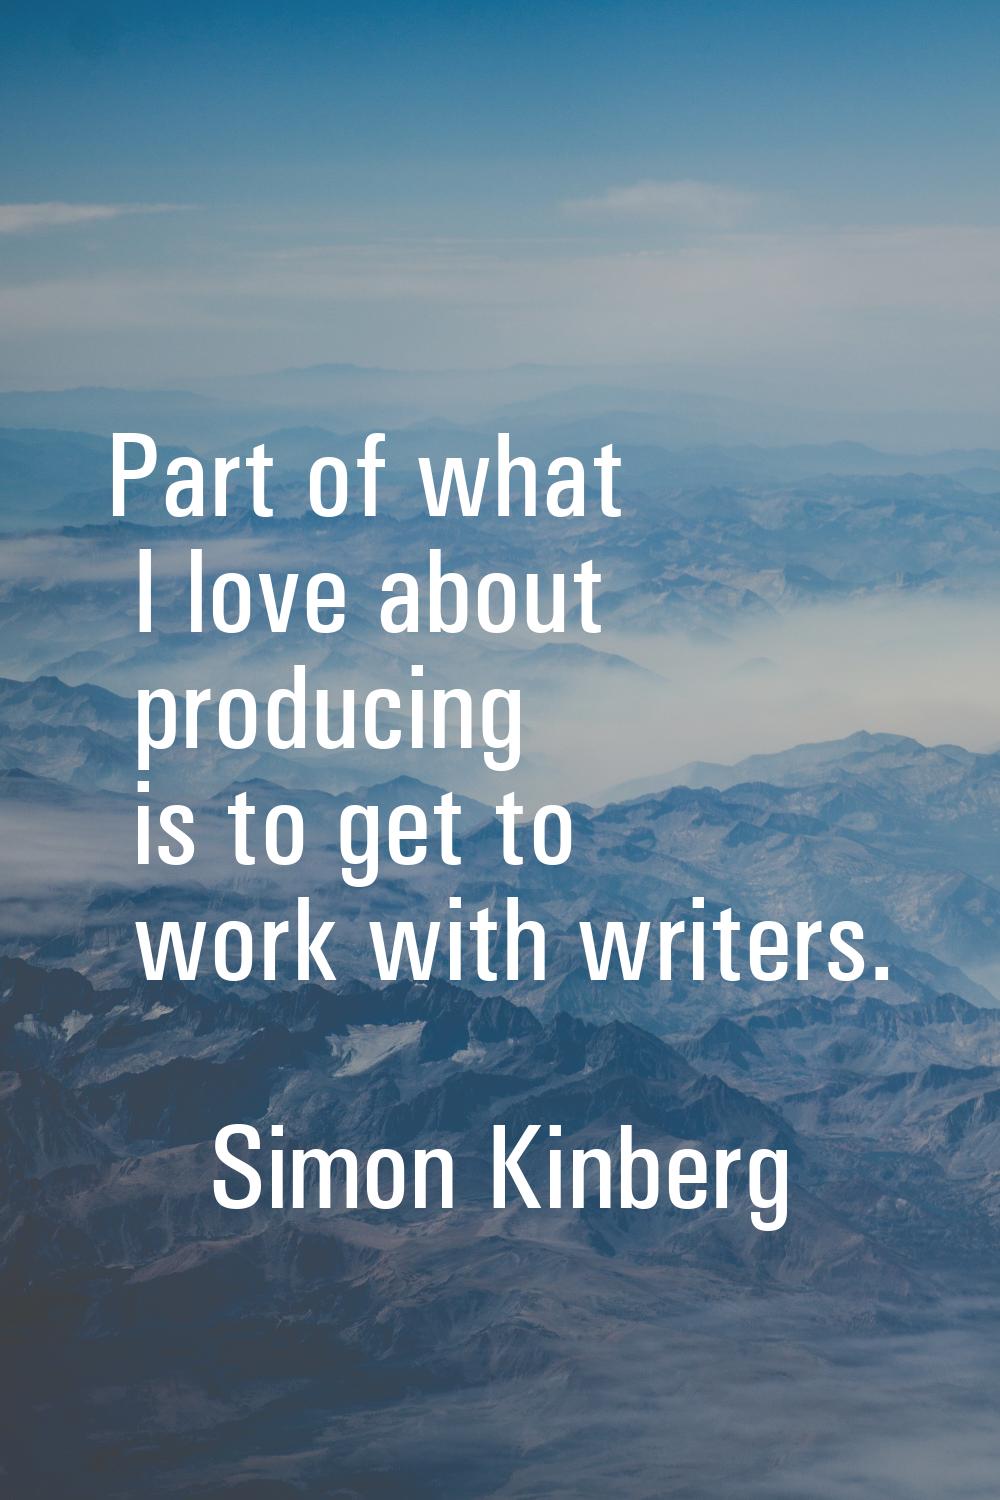 Part of what I love about producing is to get to work with writers.